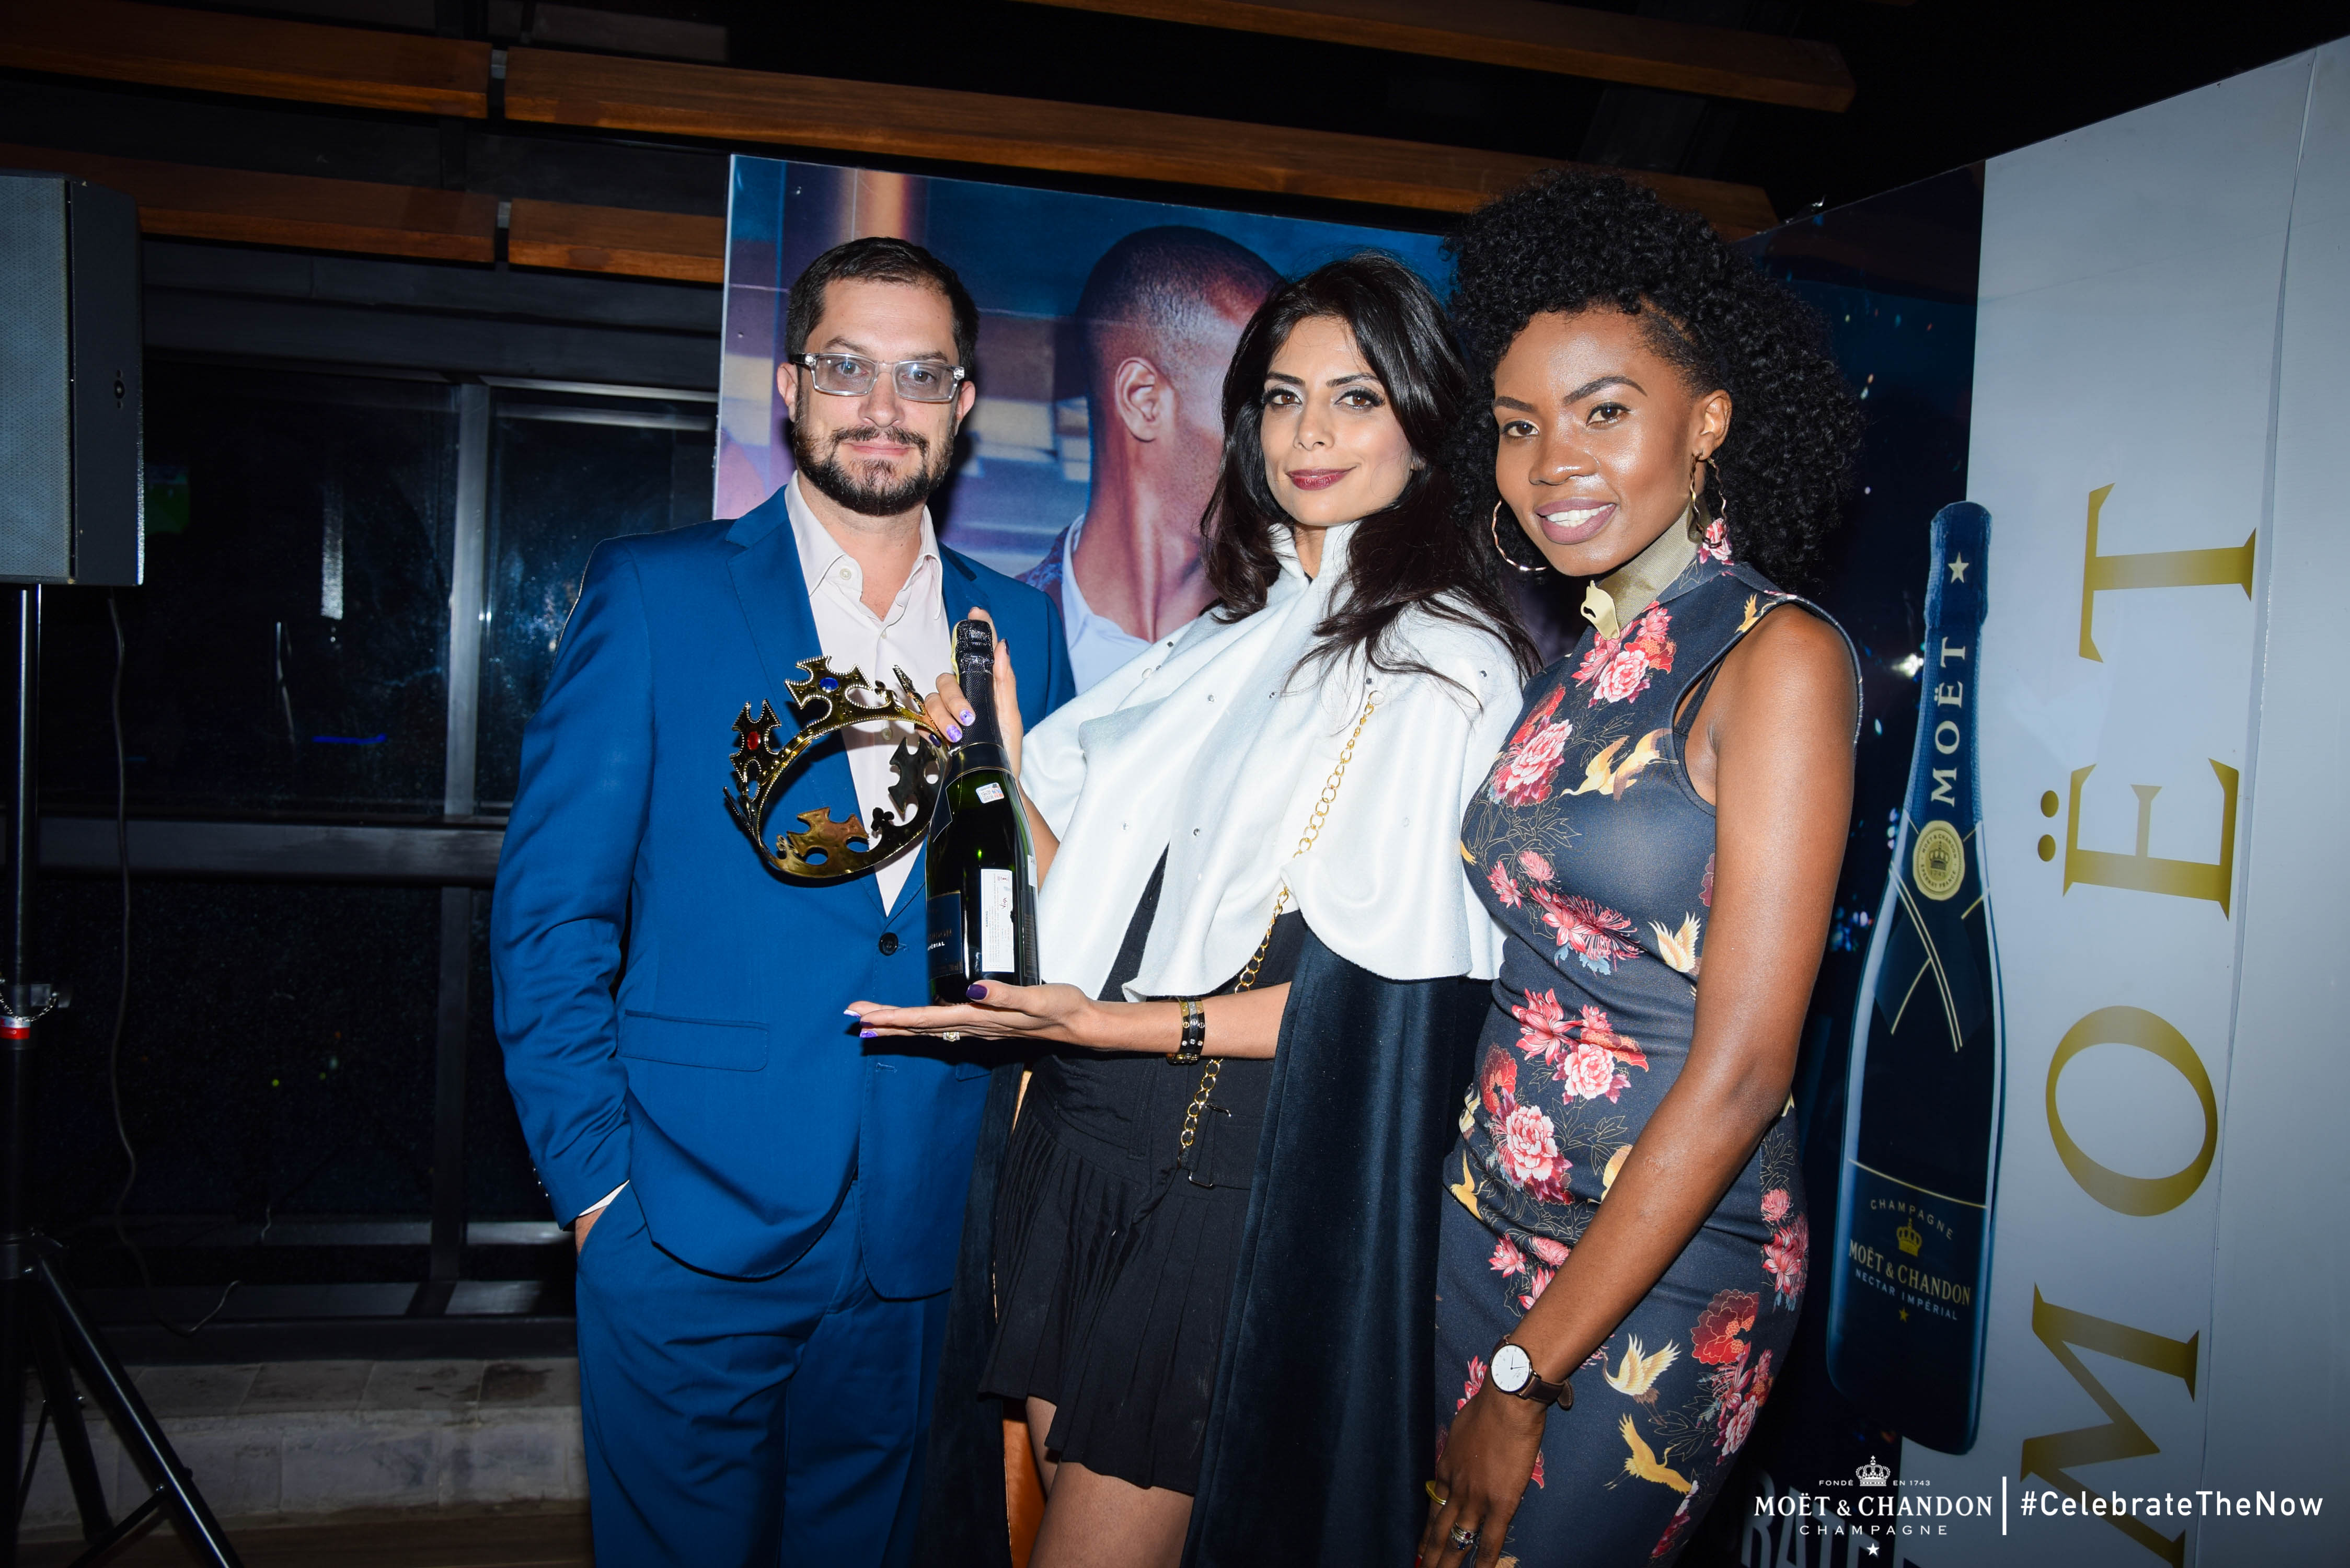 This is how the Moët & Chandon exclusive party went down, checkout the new thrill of living